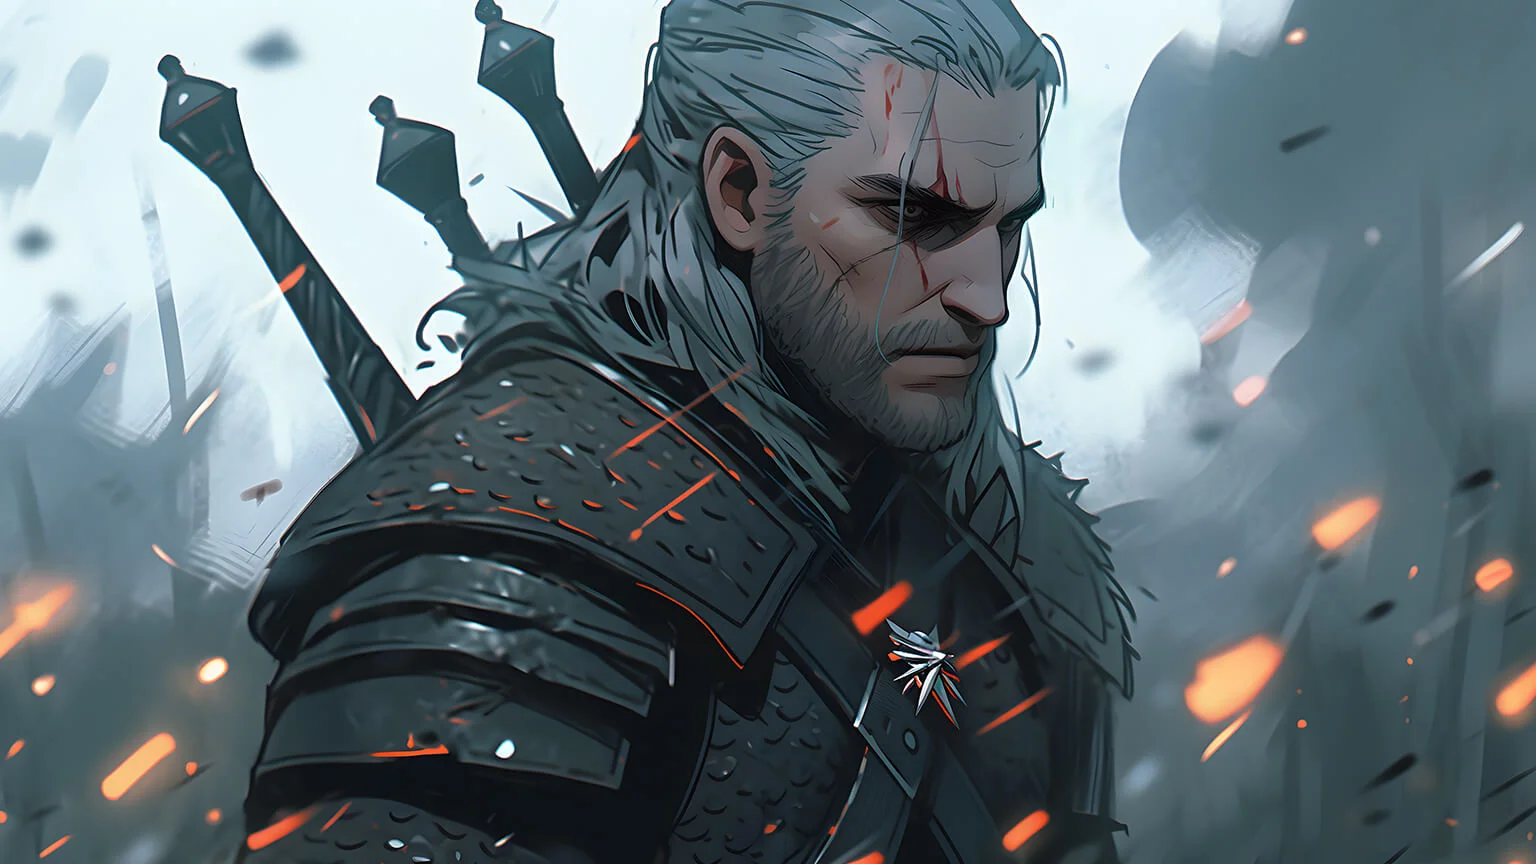 The Witcher 4 Gears Up for 2024 Production: CD Projekt RED Rallies 400 Devs